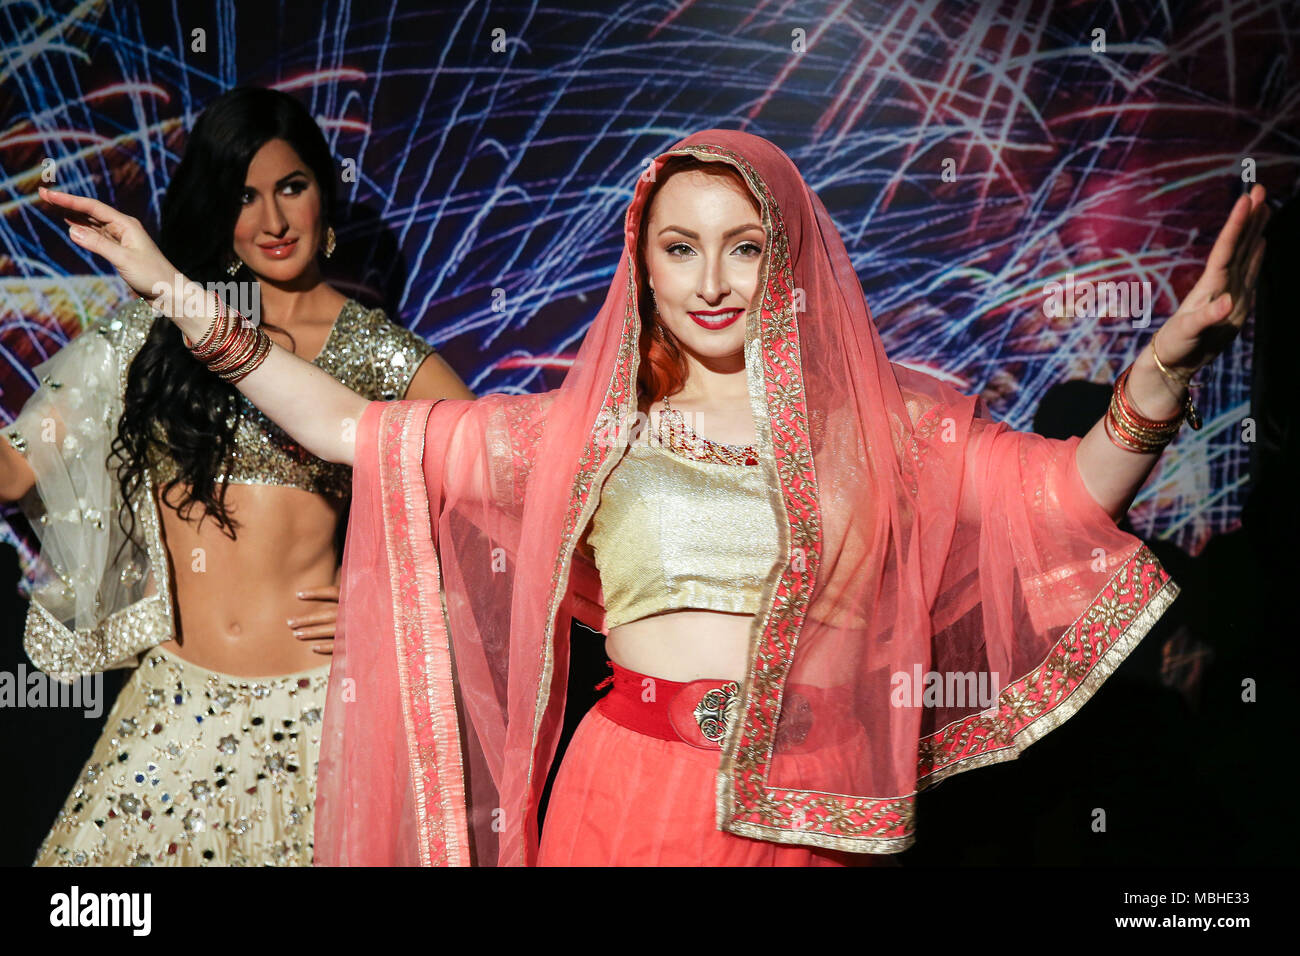 Dance performance at the Bollywood Experience, dedicated to Indian cinema at Madame Tussauds New York in the United States on Tuesday, 10. Visitors will come face to face with figures from some of India's most iconic stars including Shah Rukh Khan, Ashwarya Rai, Amitabh Bachchan, Kareena Kappor, Hrithik Roshan, Salman Khan, Katrina Kaif and Madhuri Dixit. Celebrating all things, Bollywood, vibrant art installations, projections and music will bring the experience to life. (PHOTO: WILLIAM VOLCOV/BRAZIL PHOTO PRESS) Stock Photo